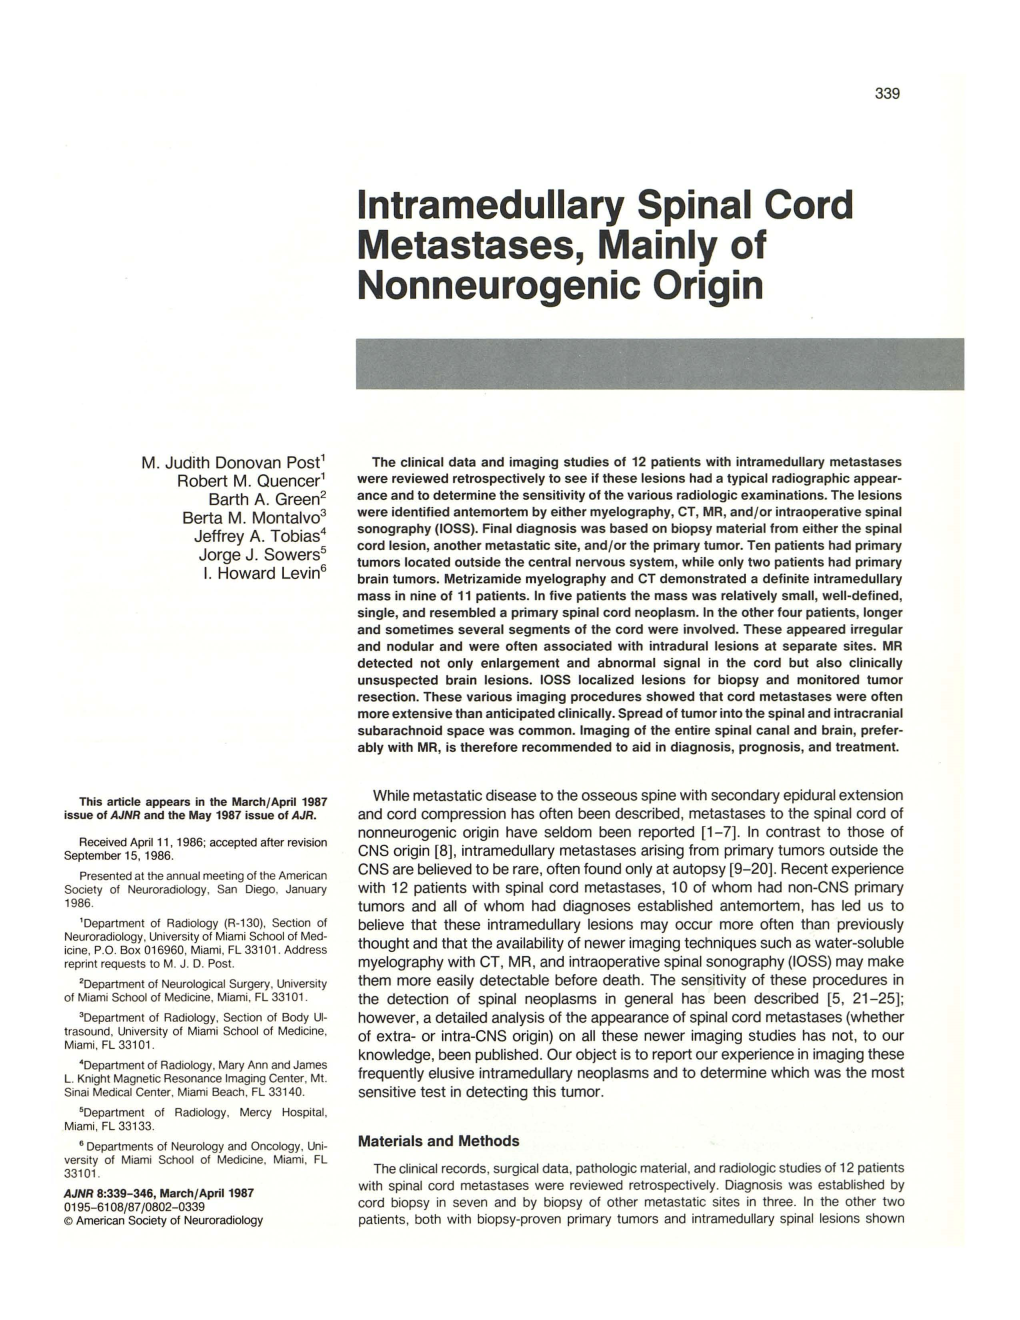 Intramedullary Spinal Cord Metastases, Mainly of Nonneurogenic Origin